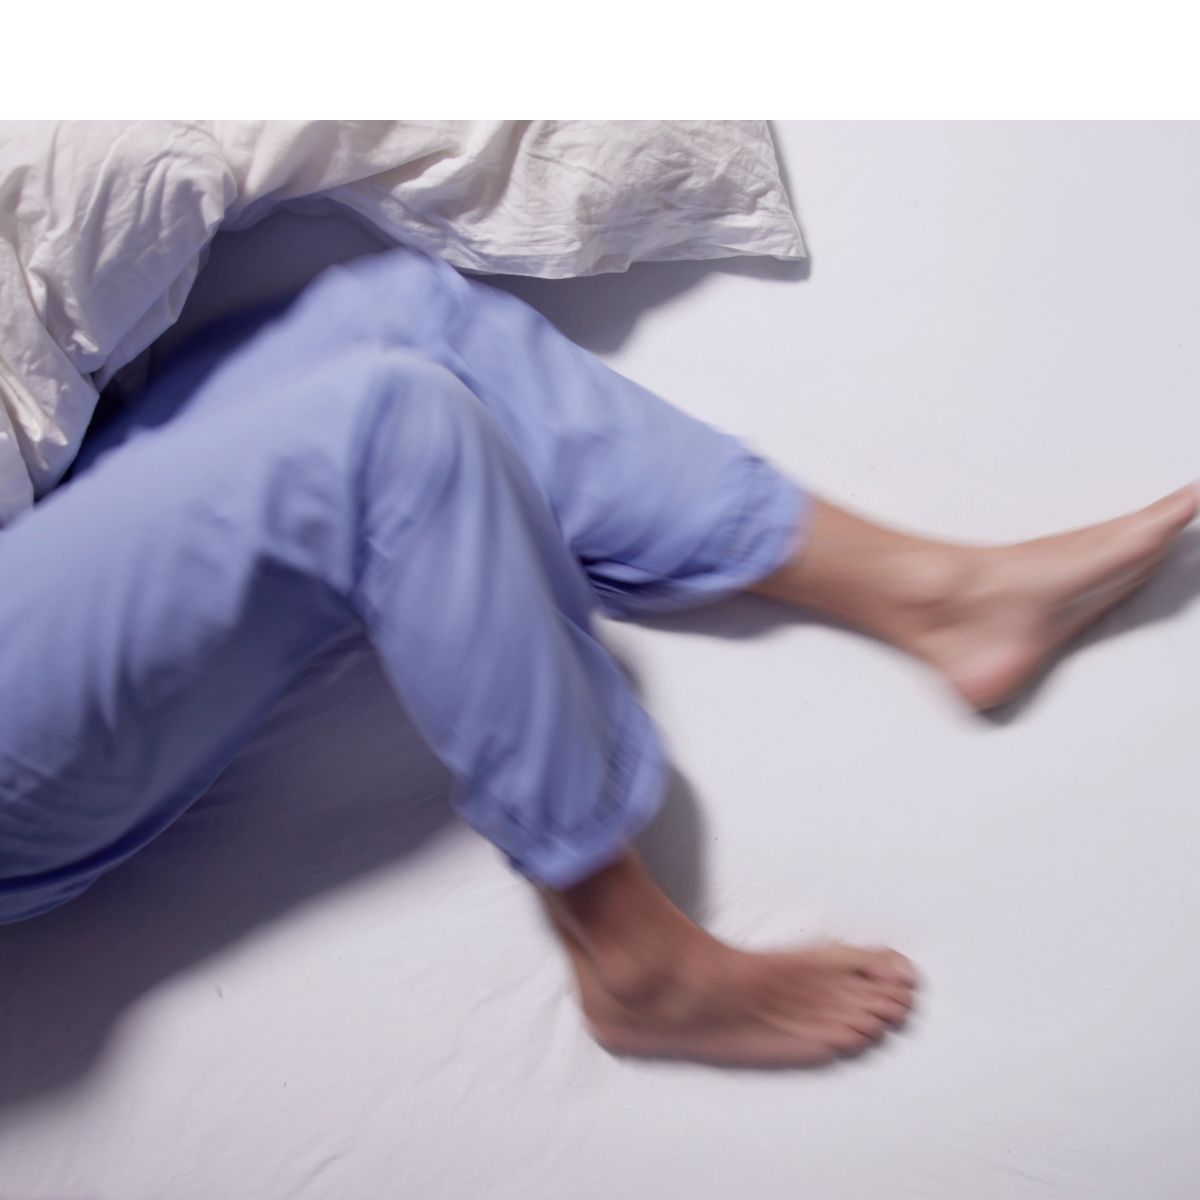 Can CPAP Help Treat Restless Leg Syndrome? Let's Find Out